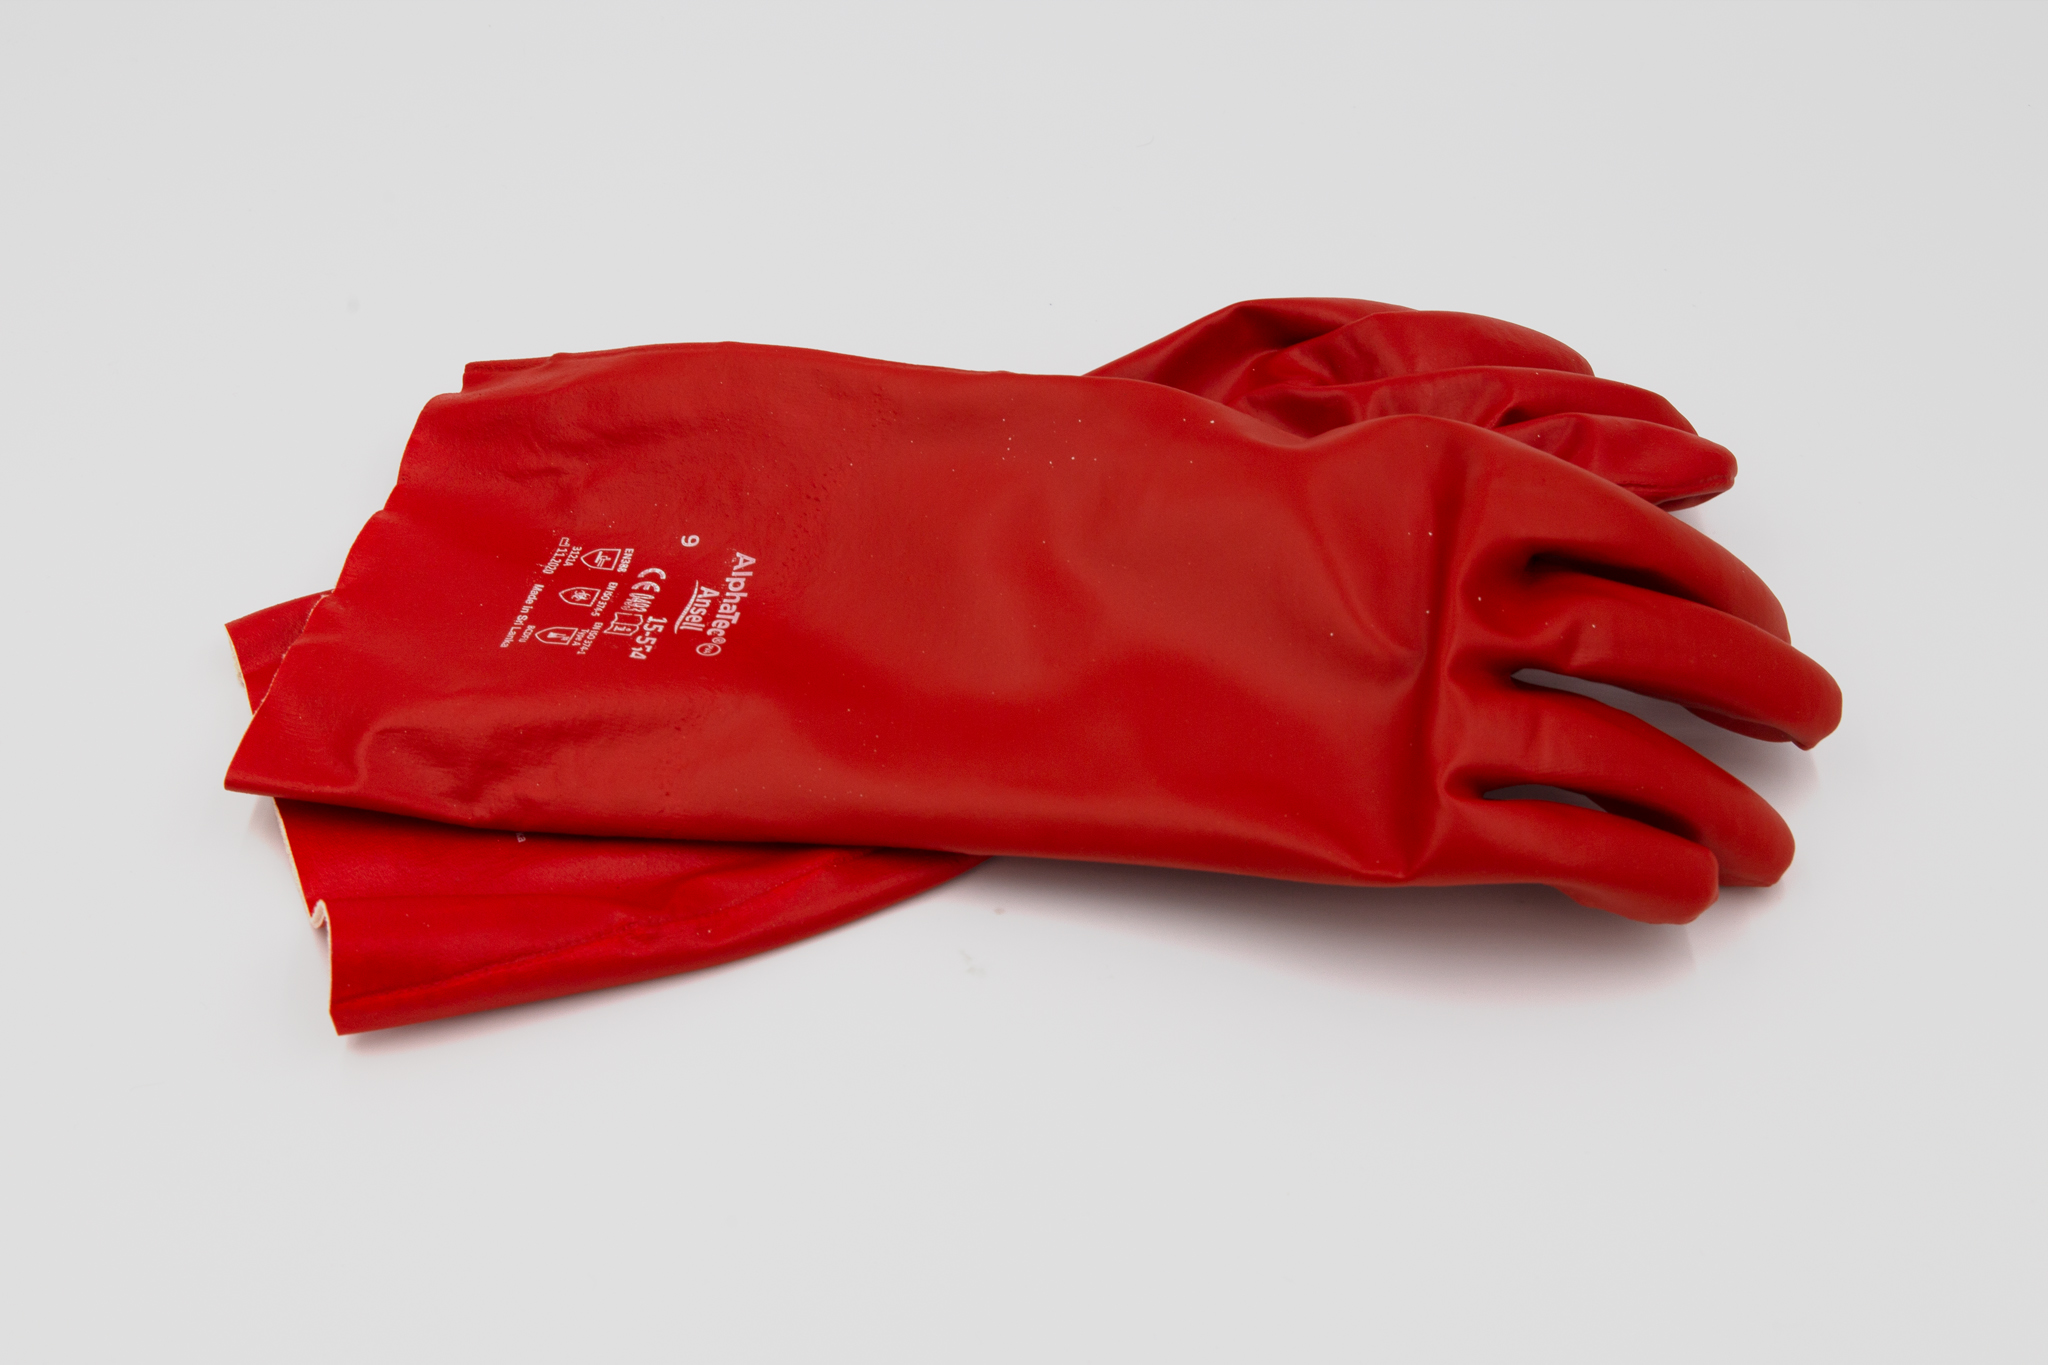 Red rubber gloves